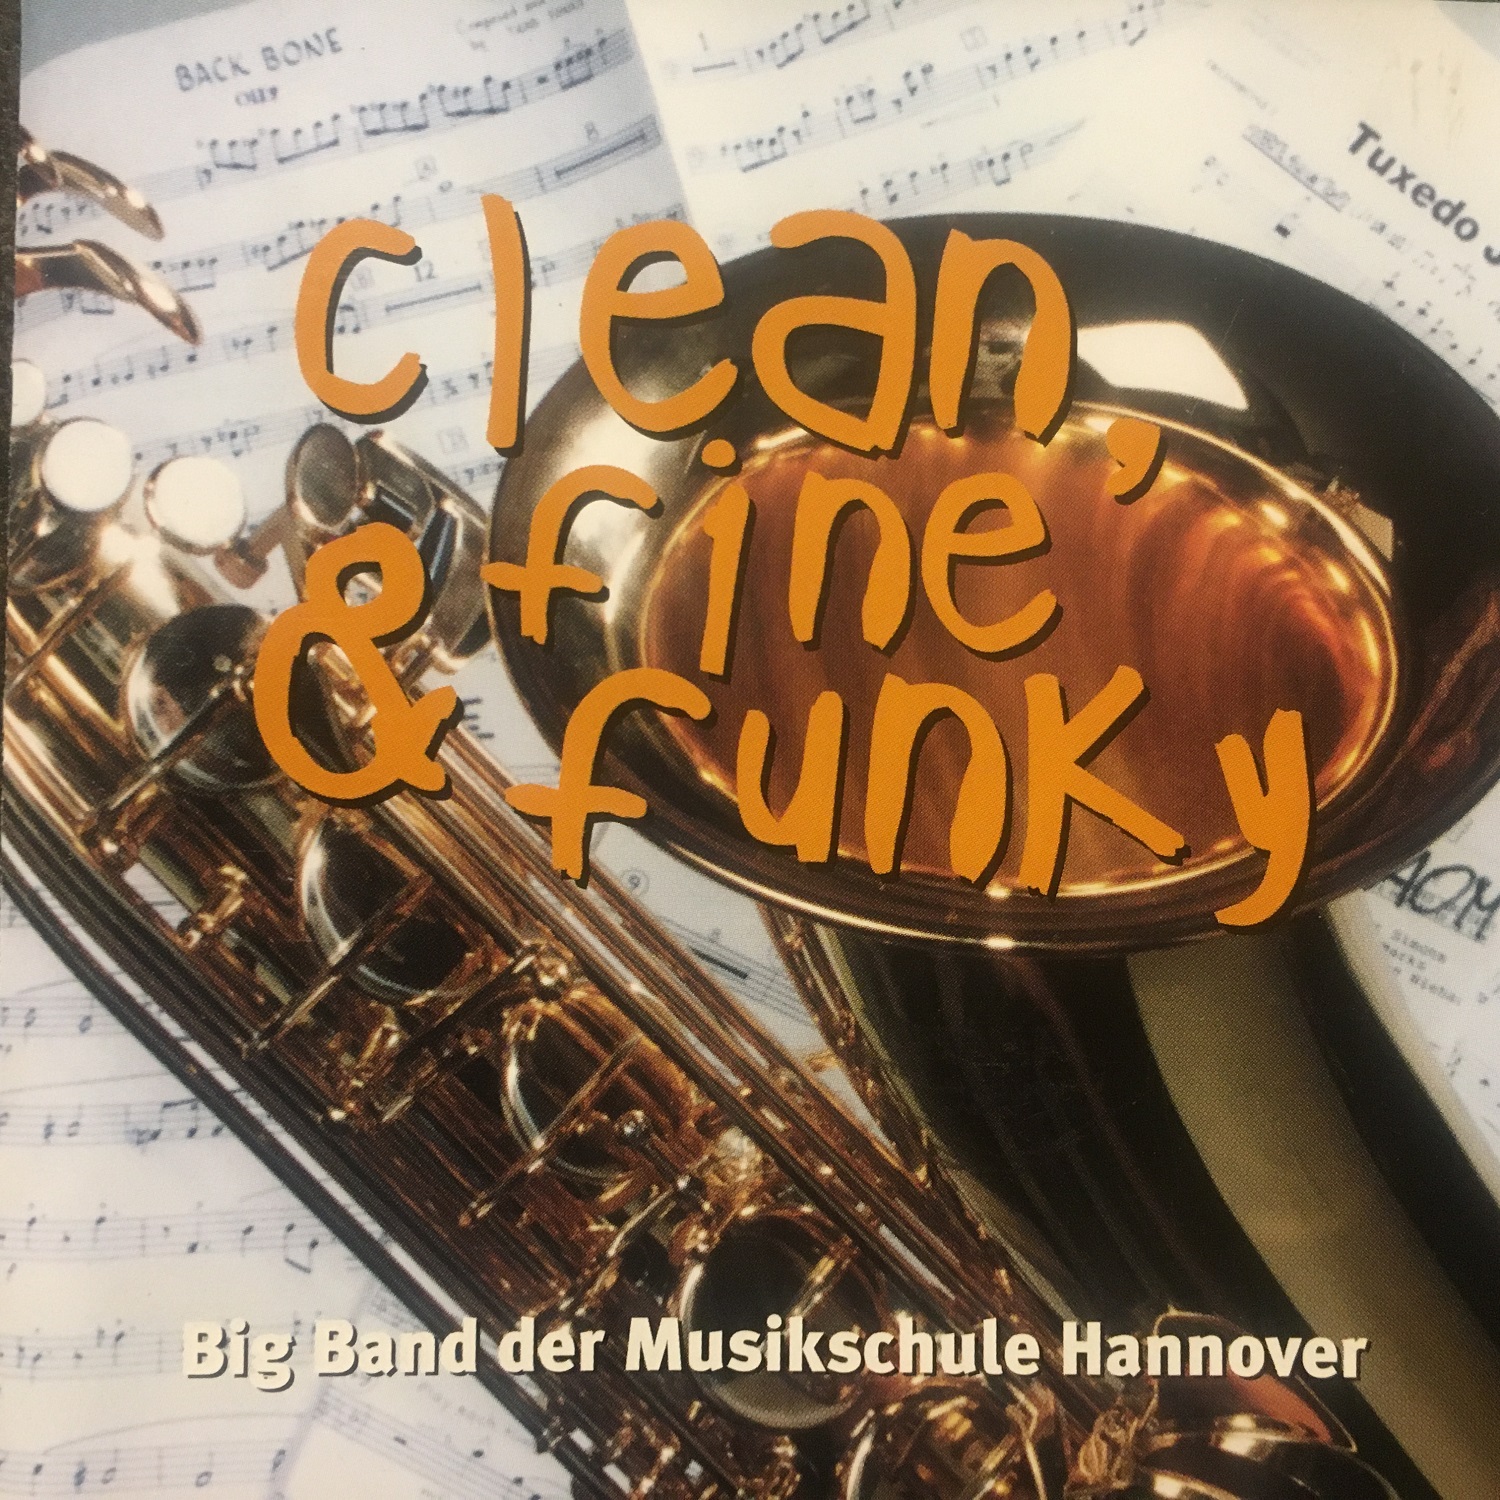 Saxophonist David Milzow mit Musikschule Hannover, Clean/Fine & Funky Big Band